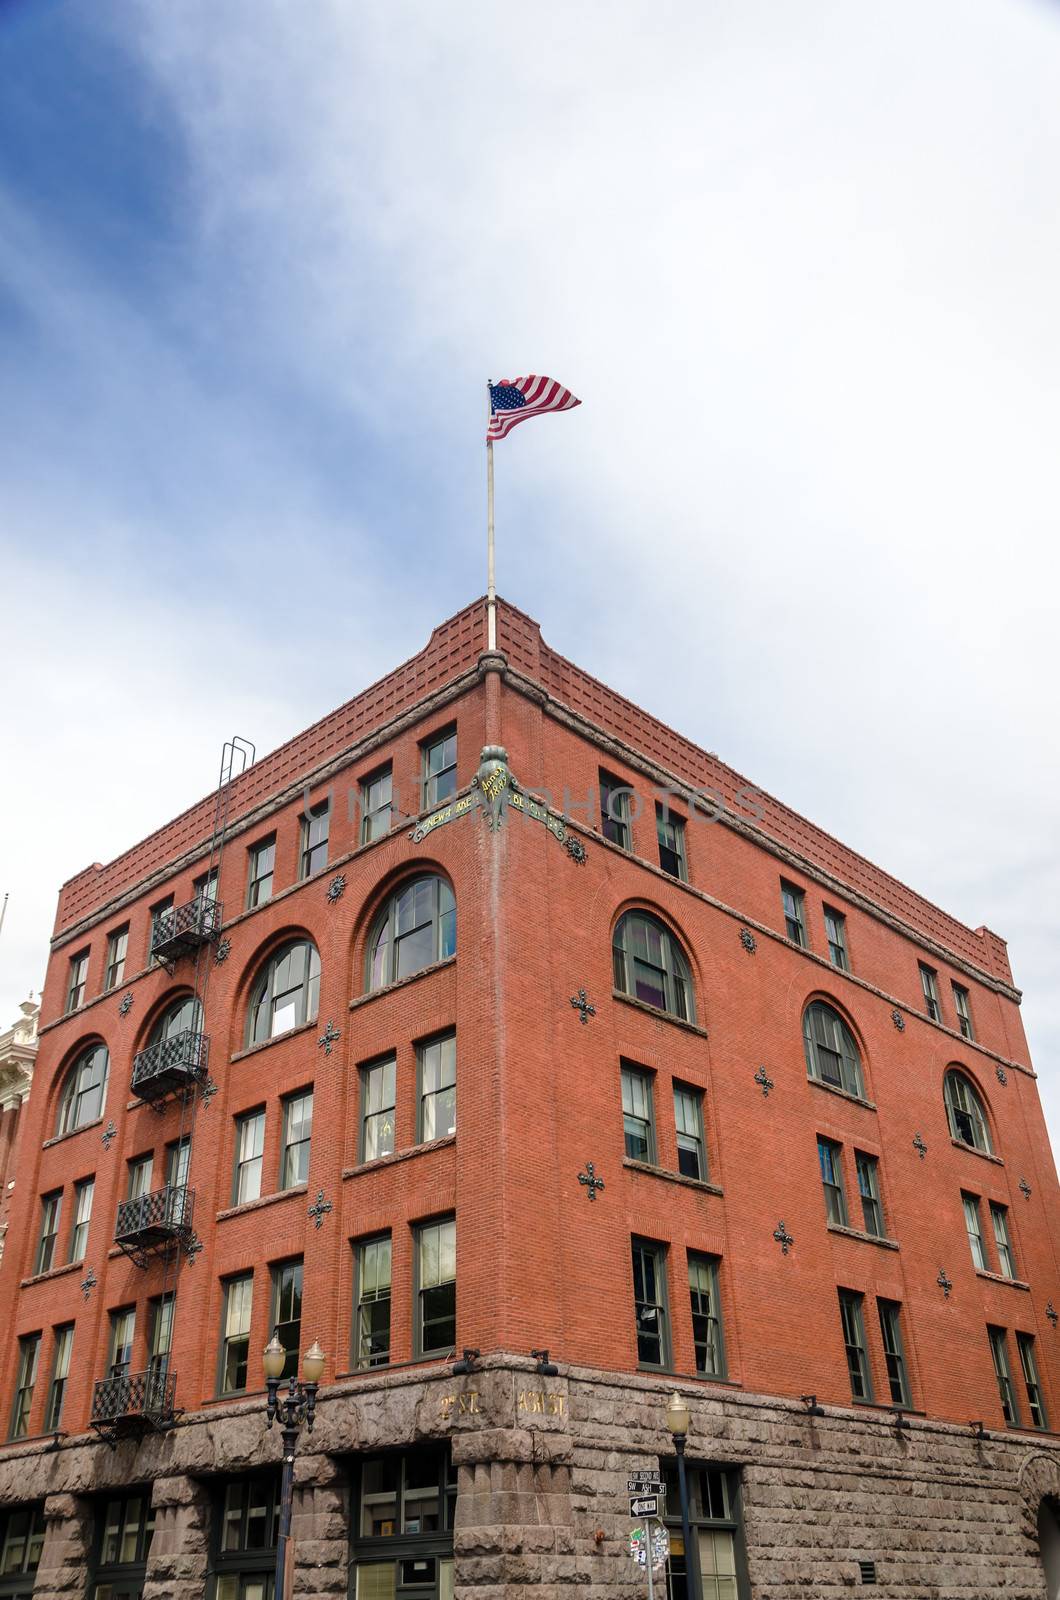 Historic red brick building in downtown Portland, Oregon with the American flag waving high above it